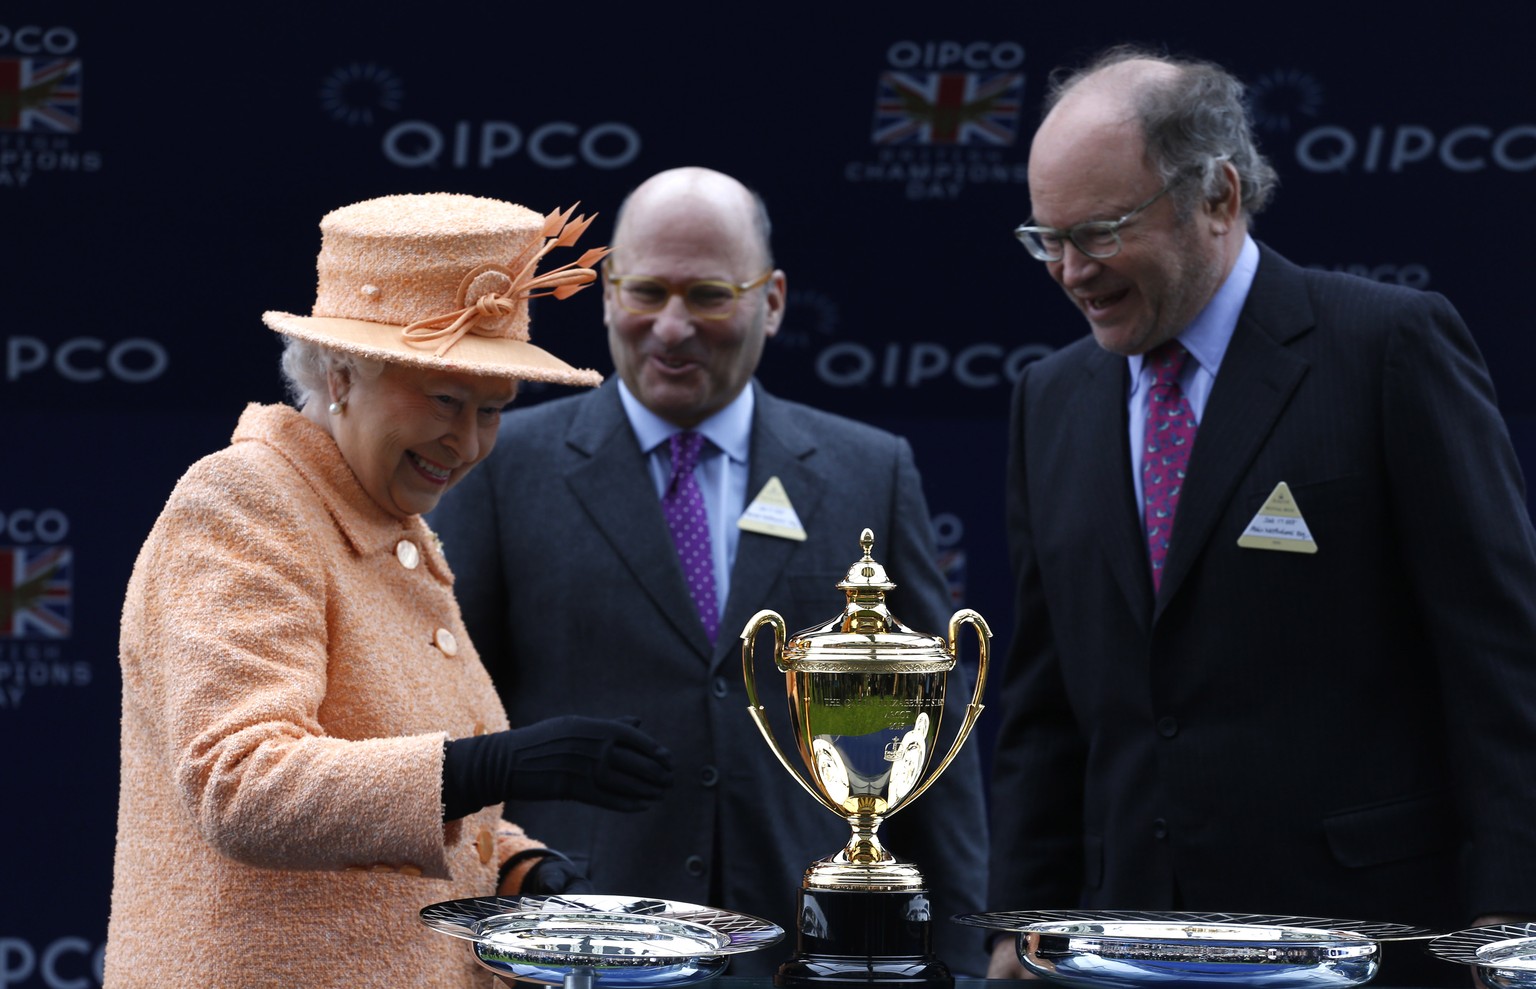 ASCOT, ENGLAND - OCTOBER 17: Queen Elizabeth II presents the trophy to owners Alain Wertheimer and Gerard Wertheimer, after their horse Solow won the Queen Elizabeth II Stakes Race run during the QIPC ...